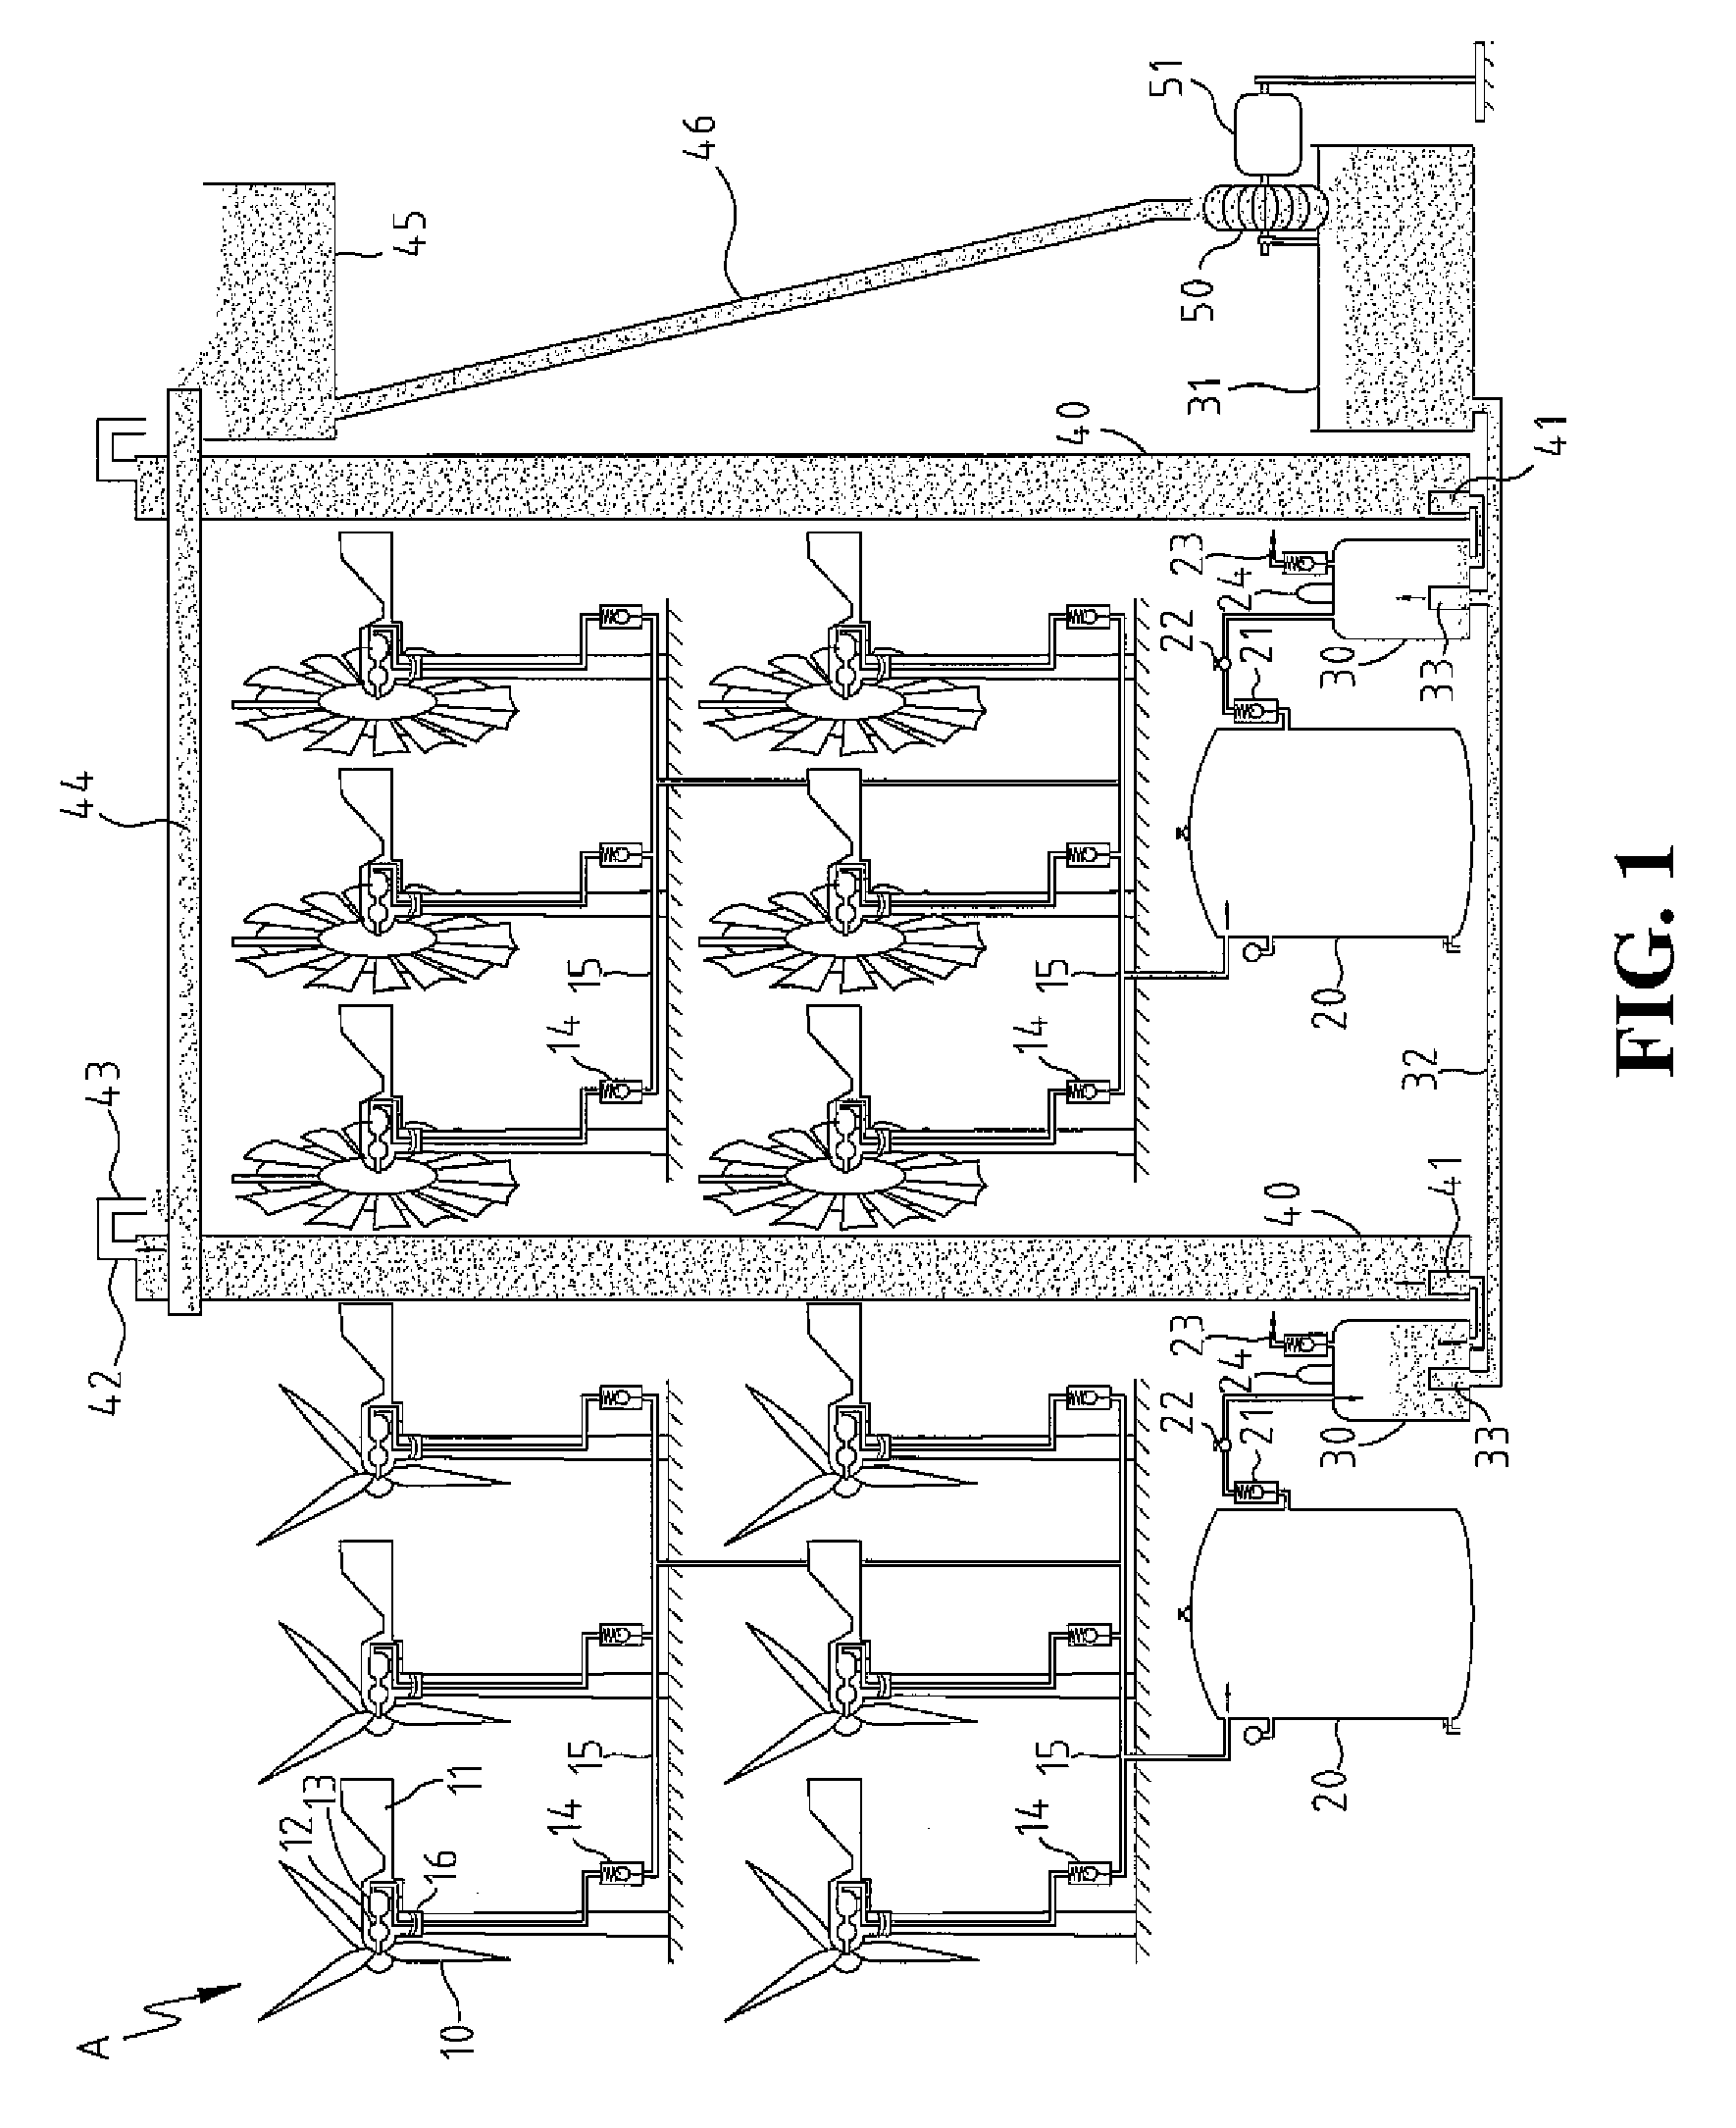 Hydraulic power generation system driven by compression air produced by fluid